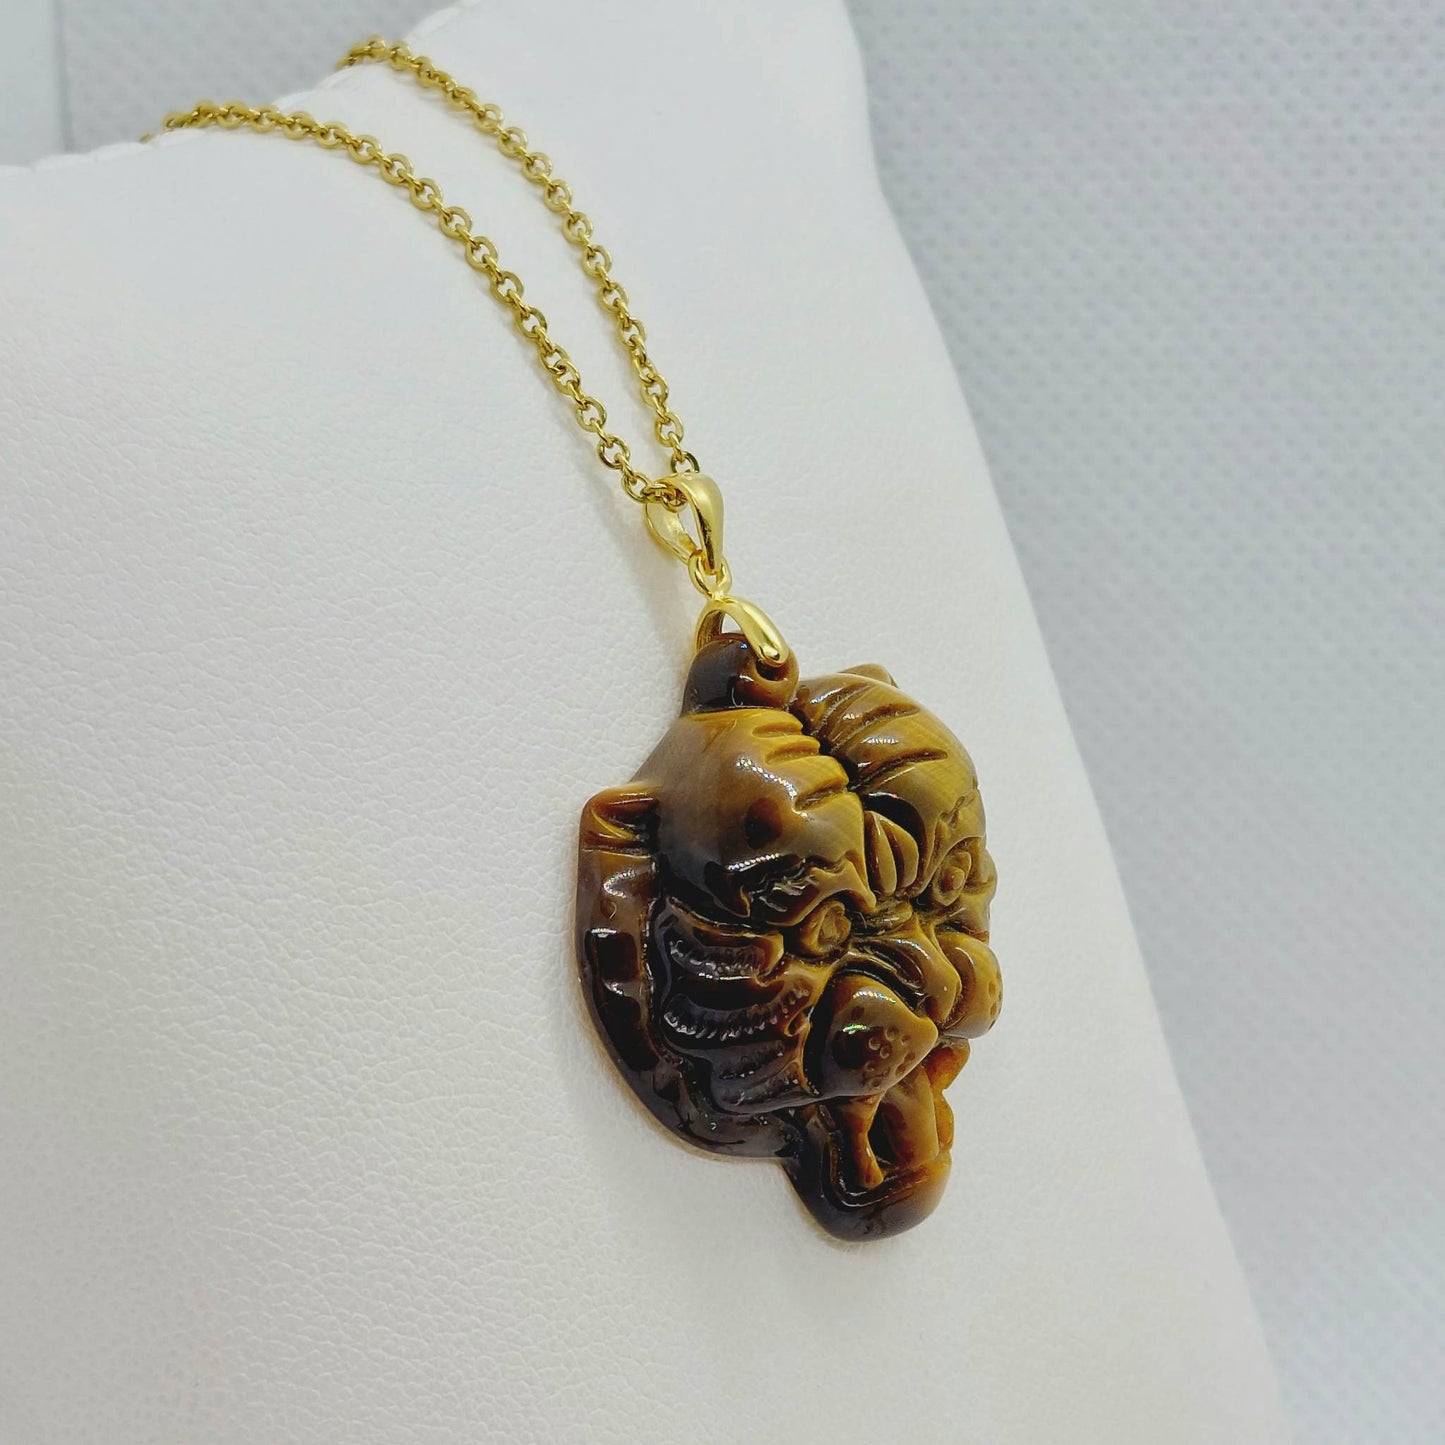 Natural Tiger Eye Tiger Pendant - Stainless Steel Gold Plated Chain Necklace